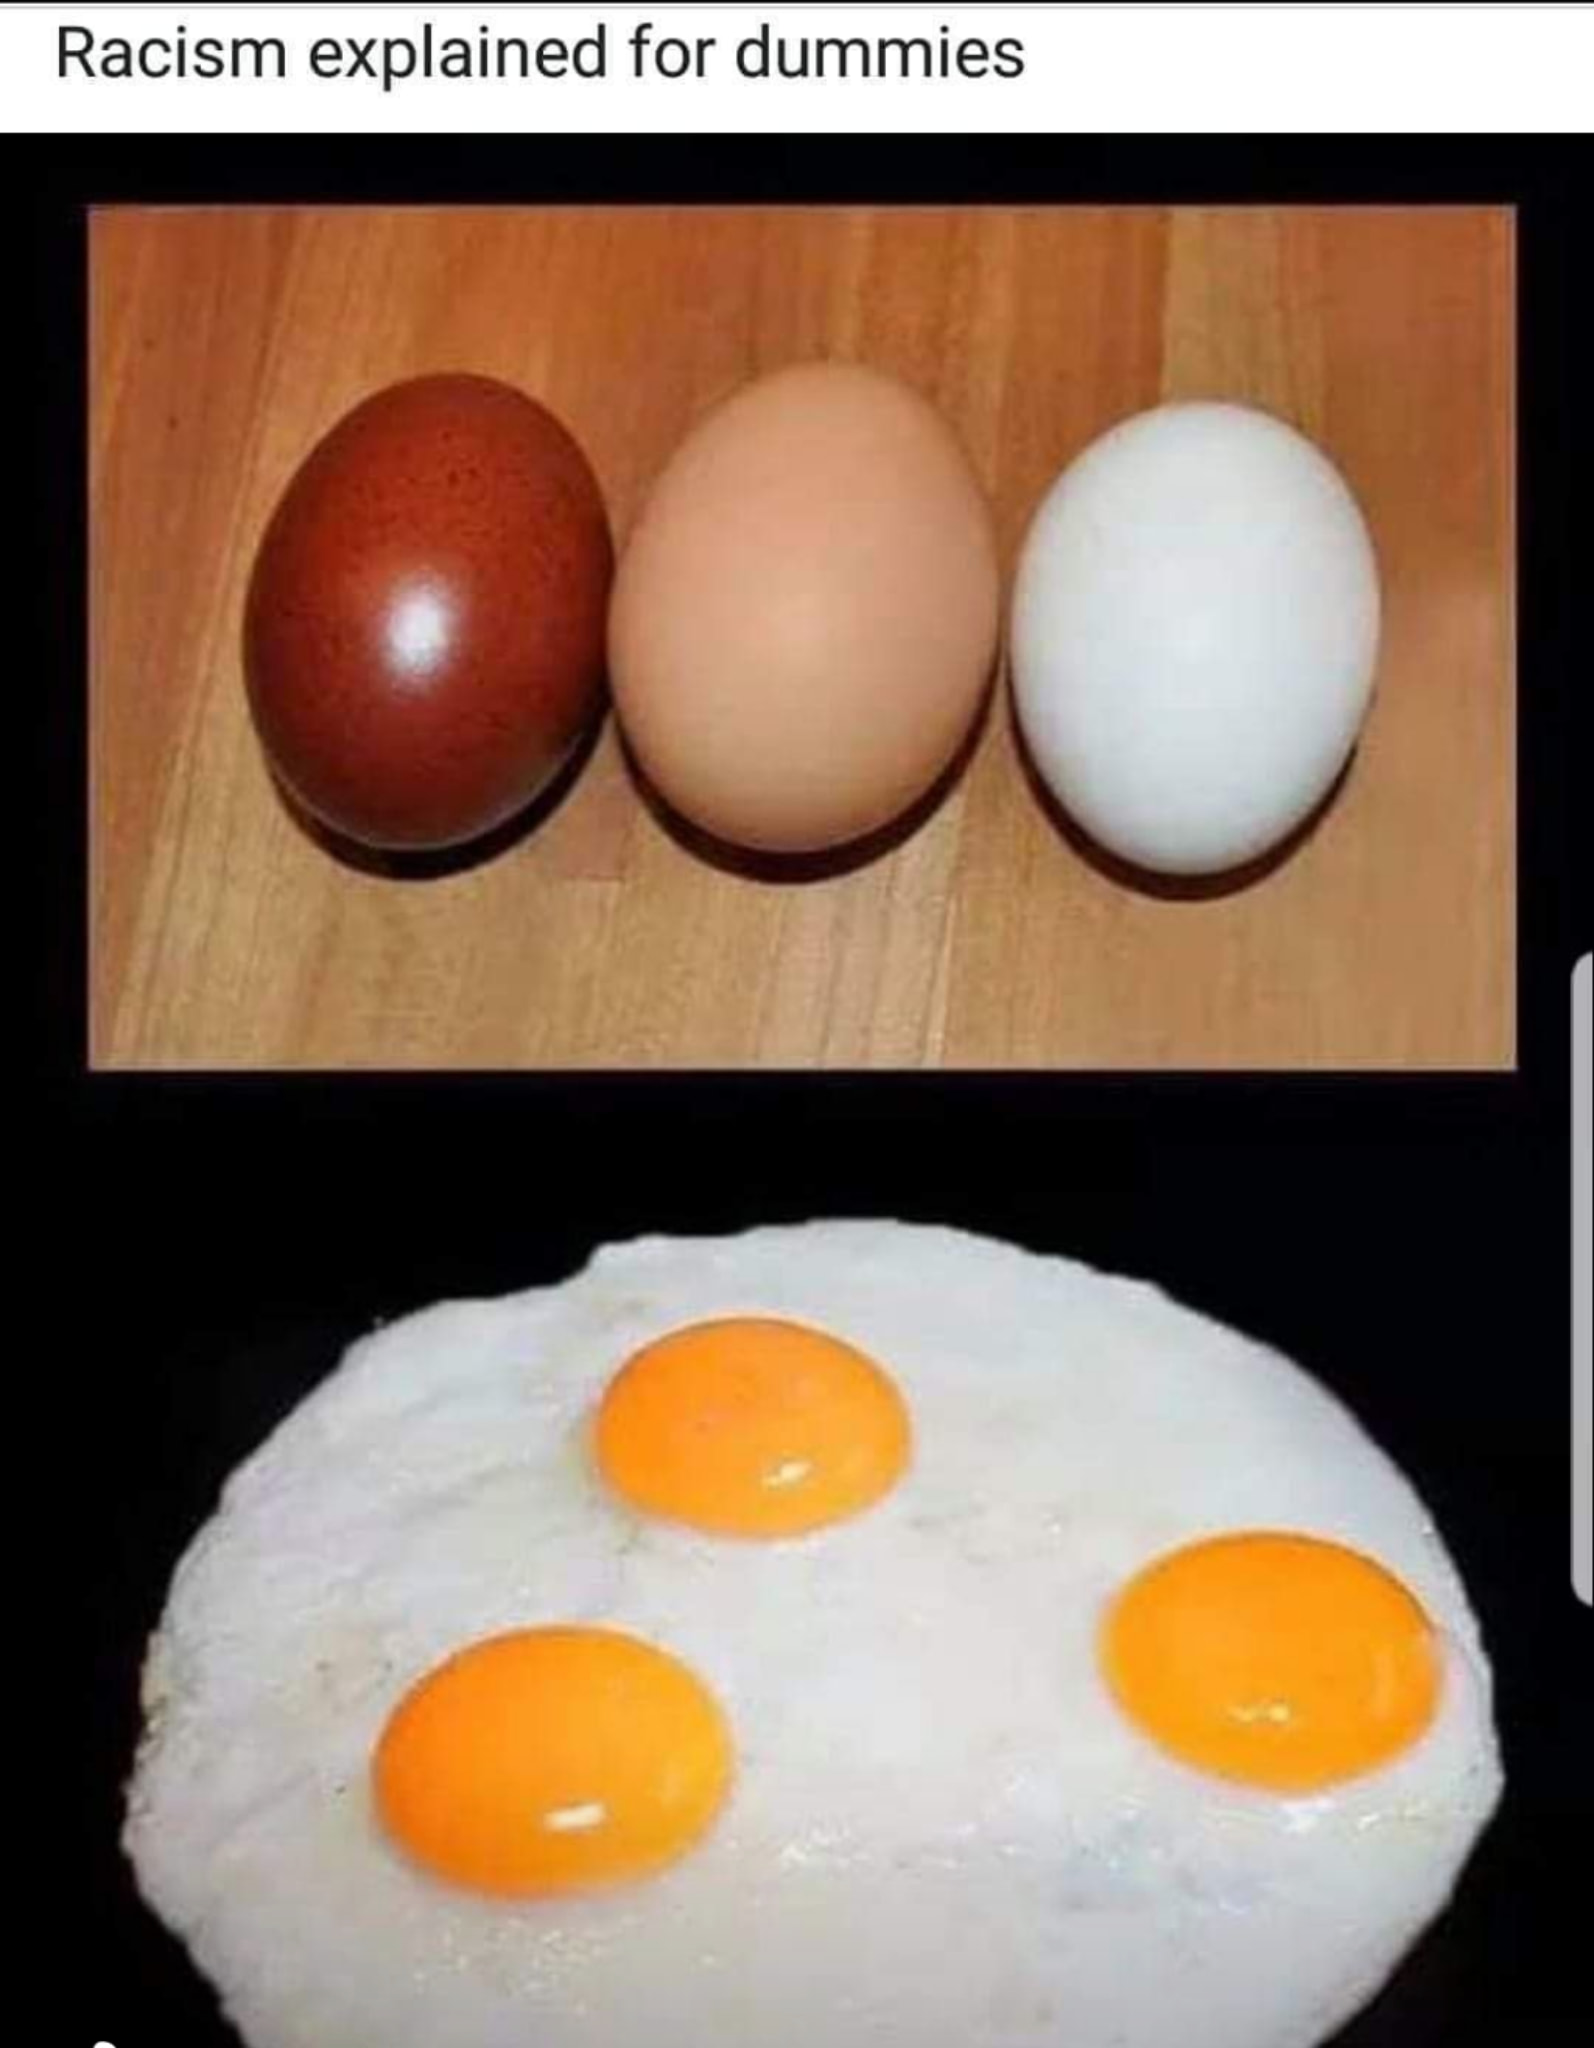 Racism Explained for Dummies : Three eggs example